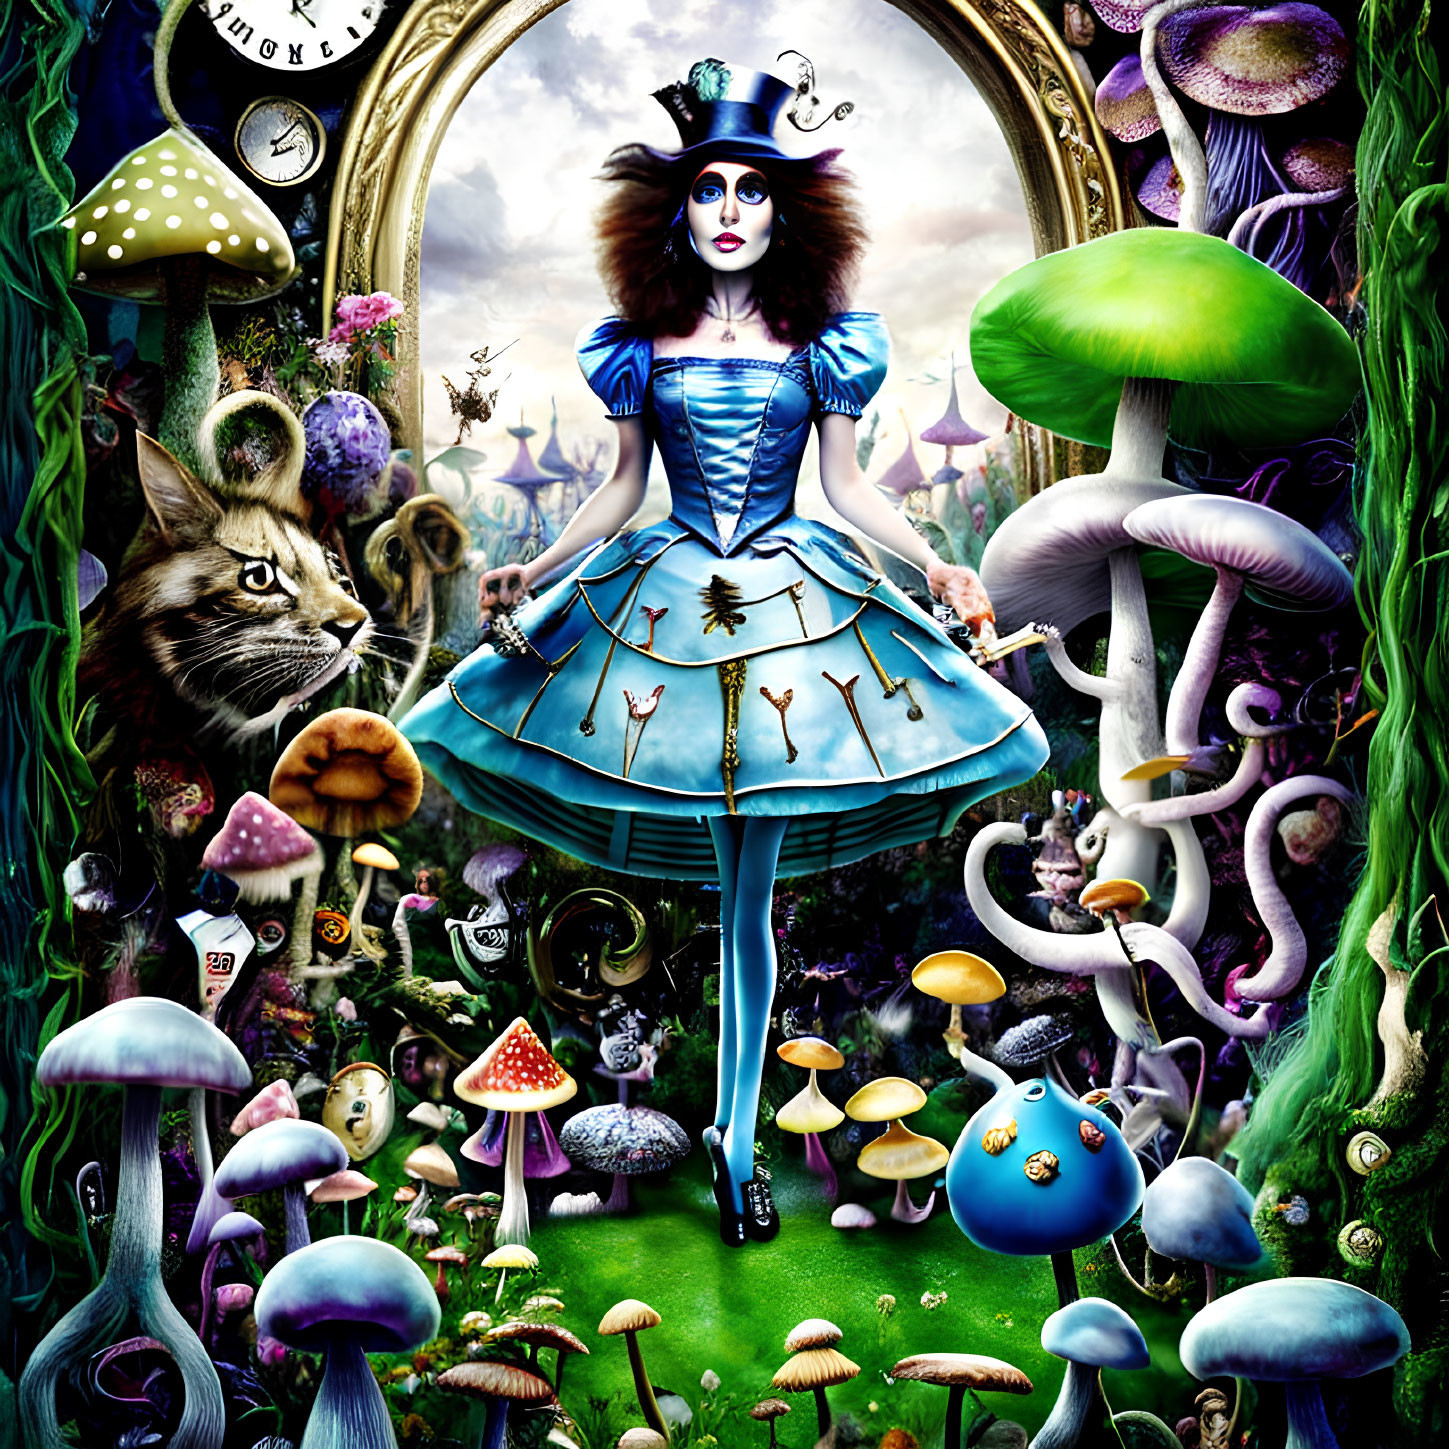 Colorful Alice in Wonderland scene with mushrooms, Cheshire Cat, and fantastical elements